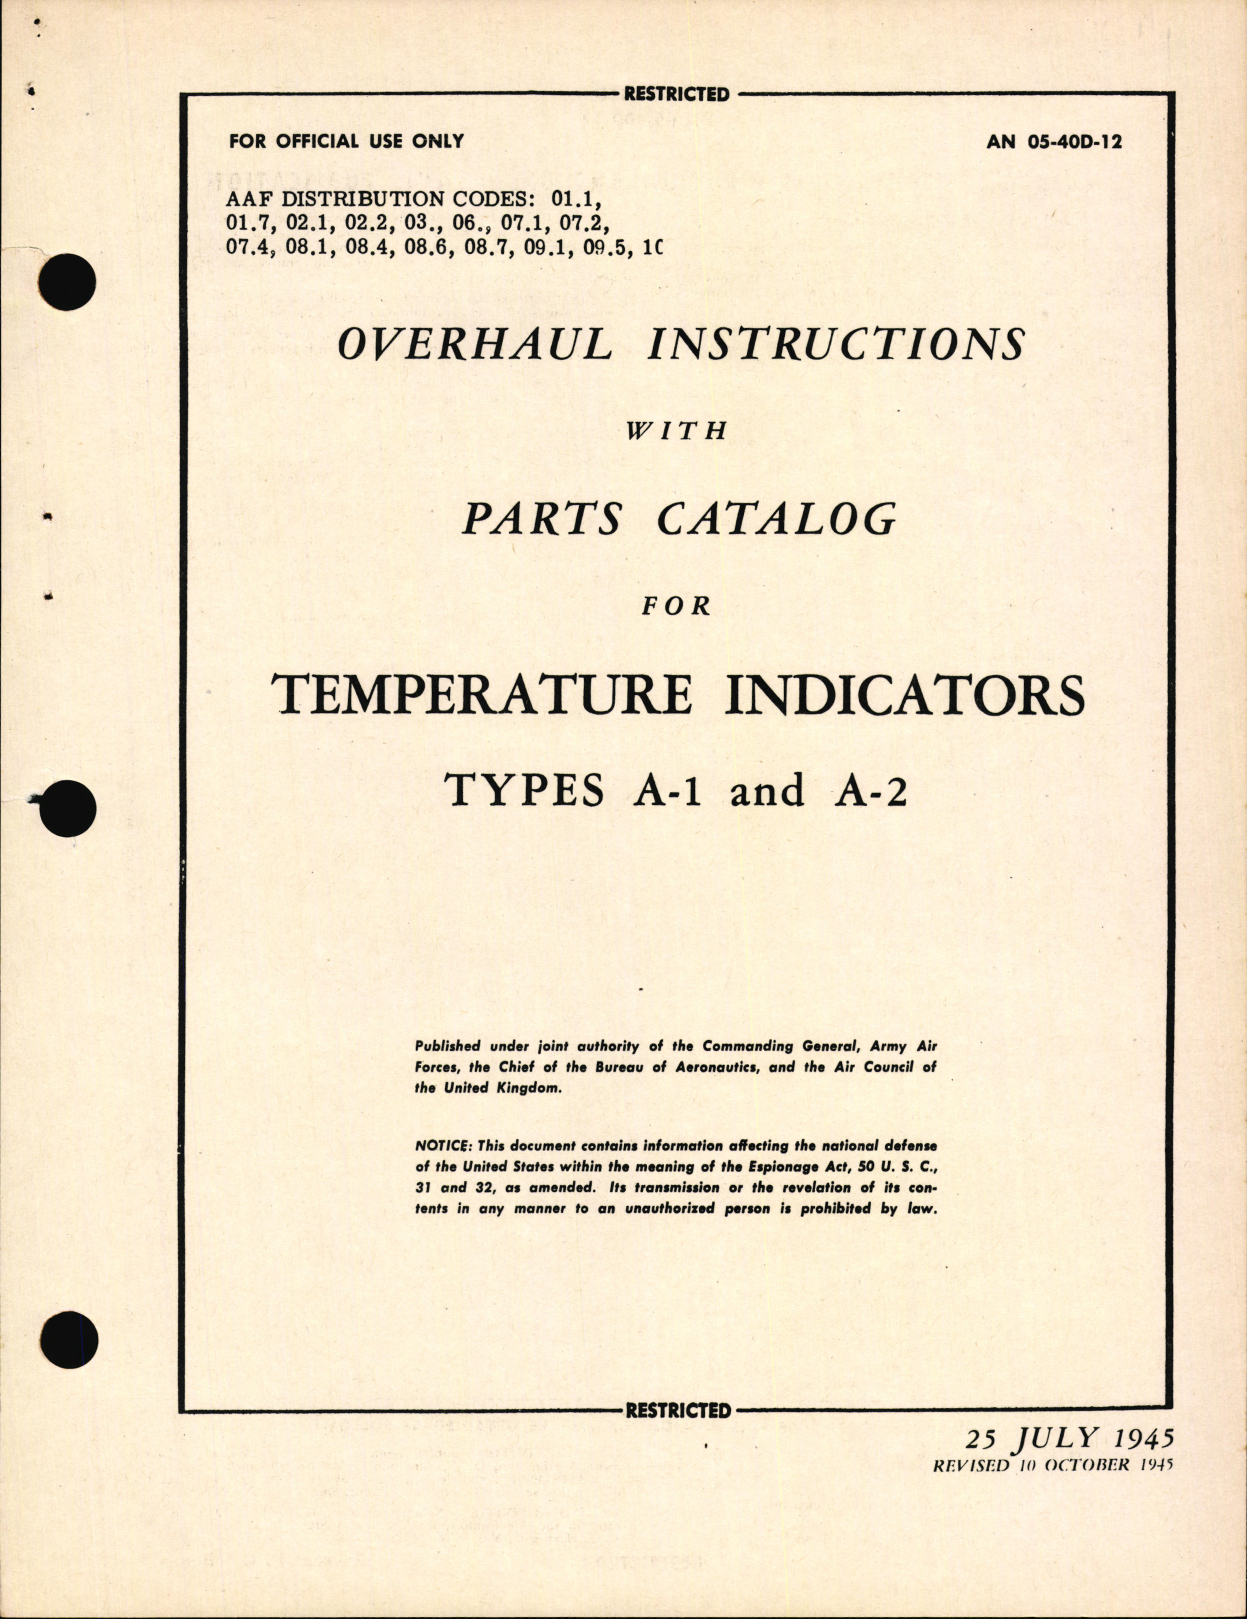 Sample page 5 from AirCorps Library document: Overhaul Instructions with Parts Catalog for Temperature Indicators Types A-1 and A-2